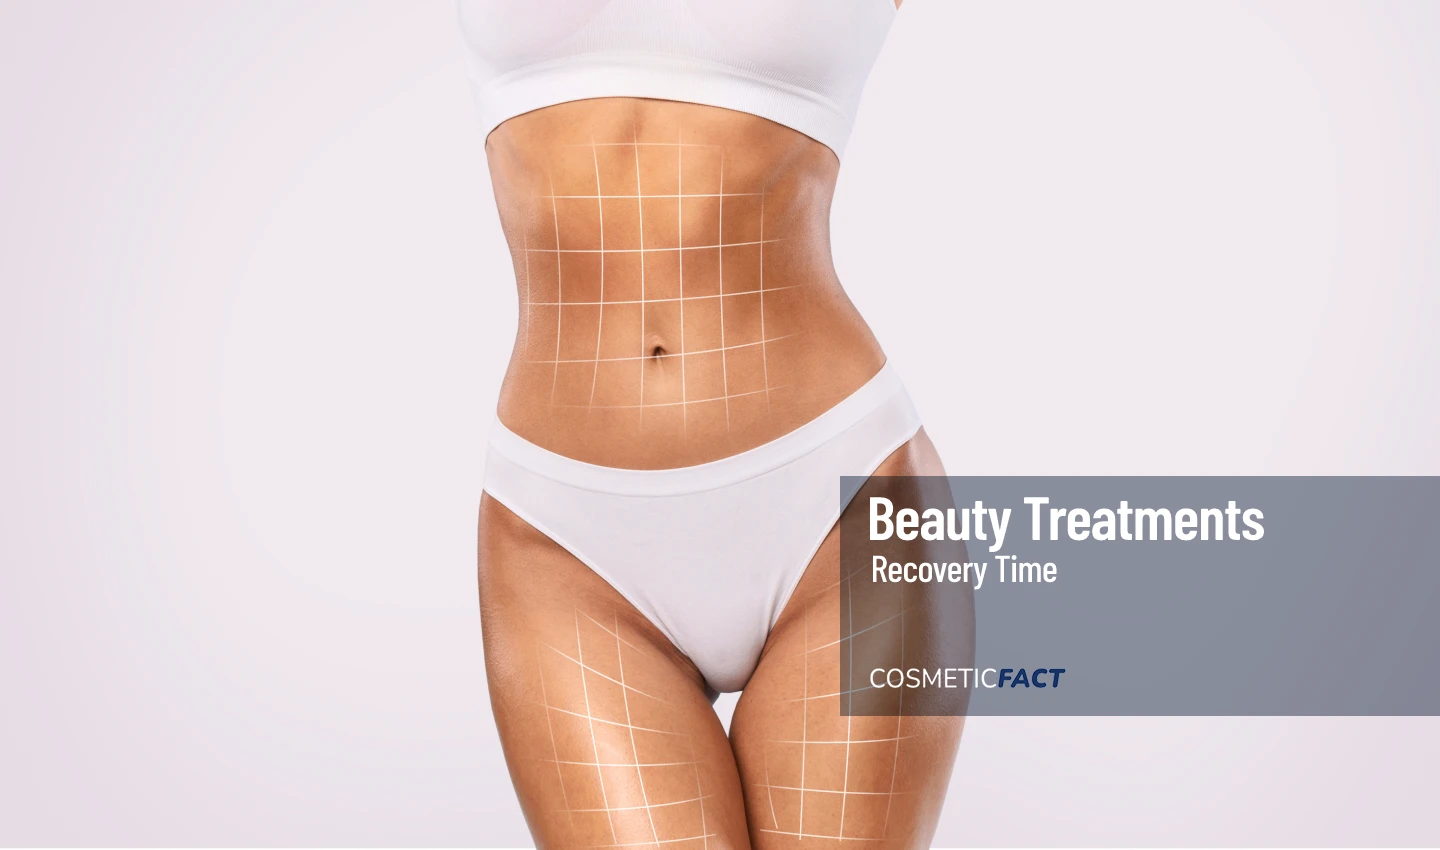 Image of a patient's body showing incision site post-tummy tuck surgery to illustrate the importance of managing recovery time after liposuction surgery.